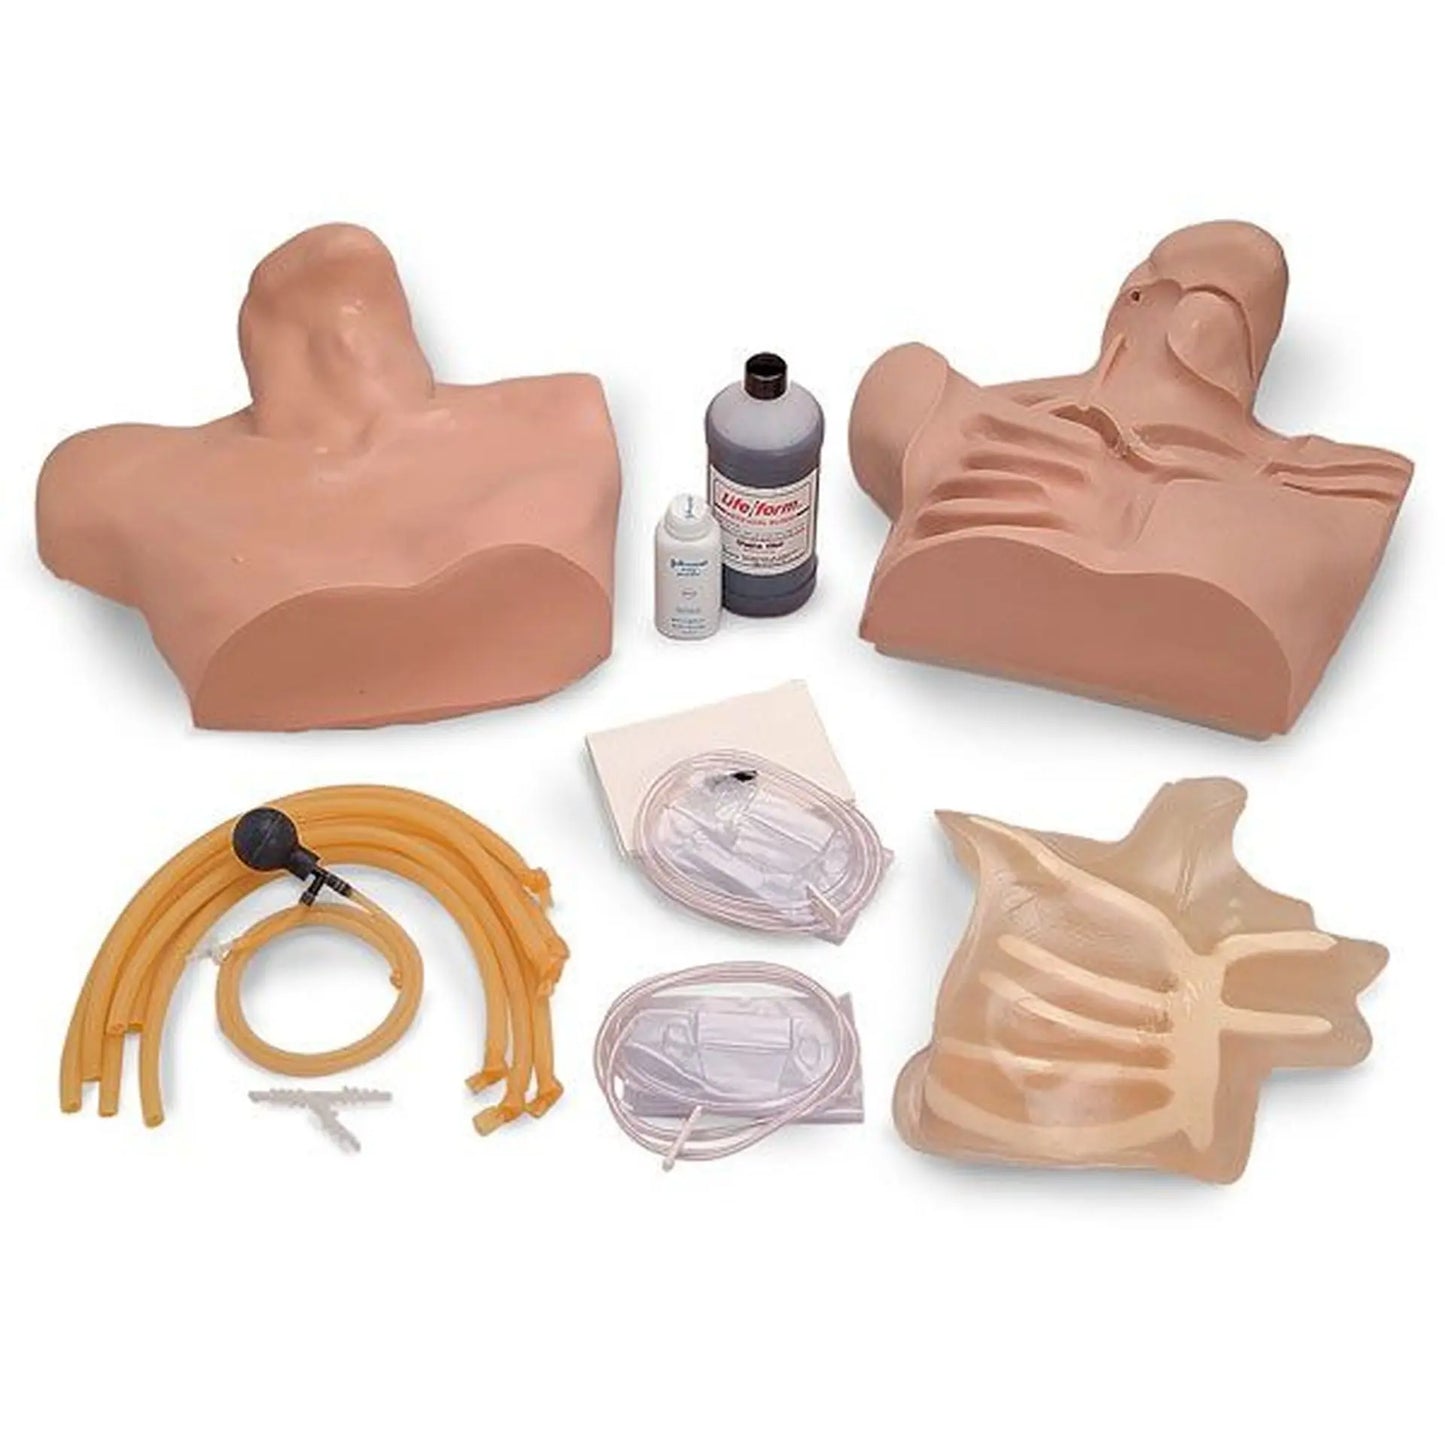 Central Venous Cannulation Simulator Replacement Kit - First Aid Market